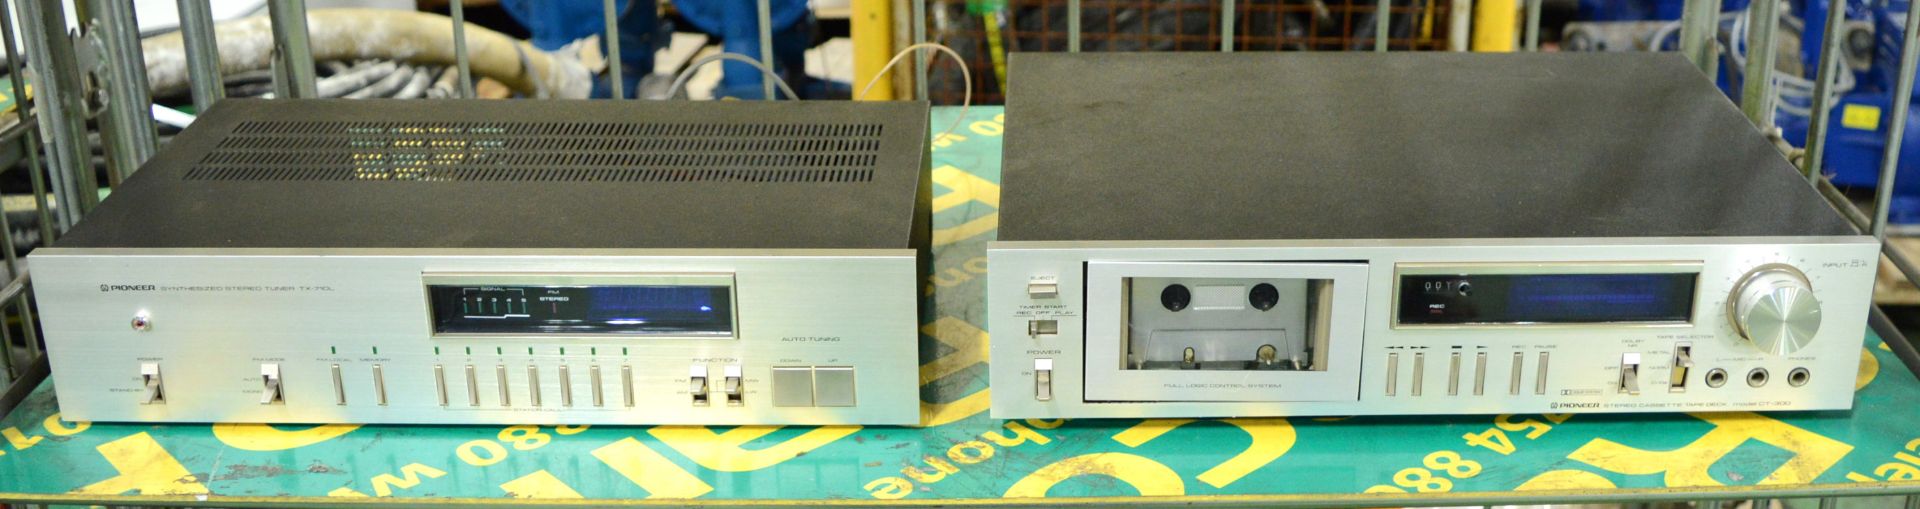 Pioneer TX-710L Tuner & CT-300 Stereo Cassette Tape Deck.